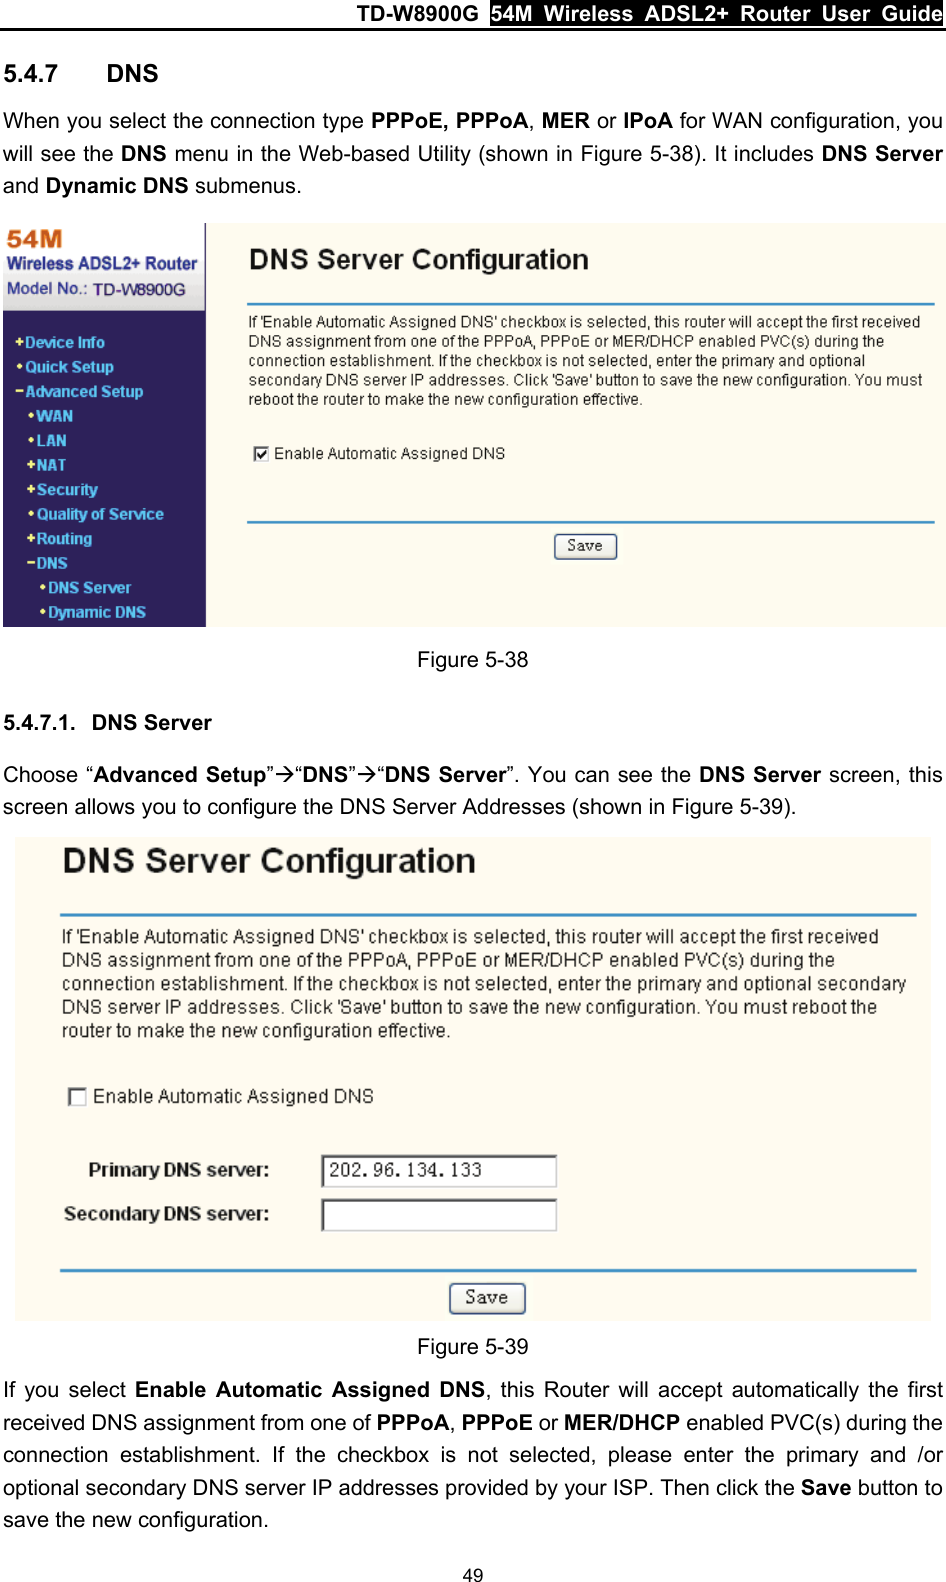 TD-W8900G  54M Wireless ADSL2+ Router User Guide 49 5.4.7  DNS When you select the connection type PPPoE, PPPoA, MER or IPoA for WAN configuration, you will see the DNS menu in the Web-based Utility (shown in Figure 5-38). It includes DNS Server and Dynamic DNS submenus.  Figure 5-38 5.4.7.1.  DNS Server Choose “Advanced Setup”Æ“DNS”Æ“DNS Server”. You can see the DNS Server screen, this screen allows you to configure the DNS Server Addresses (shown in Figure 5-39).  Figure 5-39 If you select Enable Automatic Assigned DNS, this Router will accept automatically the first received DNS assignment from one of PPPoA, PPPoE or MER/DHCP enabled PVC(s) during the connection establishment. If the checkbox is not selected, please enter the primary and /or optional secondary DNS server IP addresses provided by your ISP. Then click the Save button to save the new configuration.   